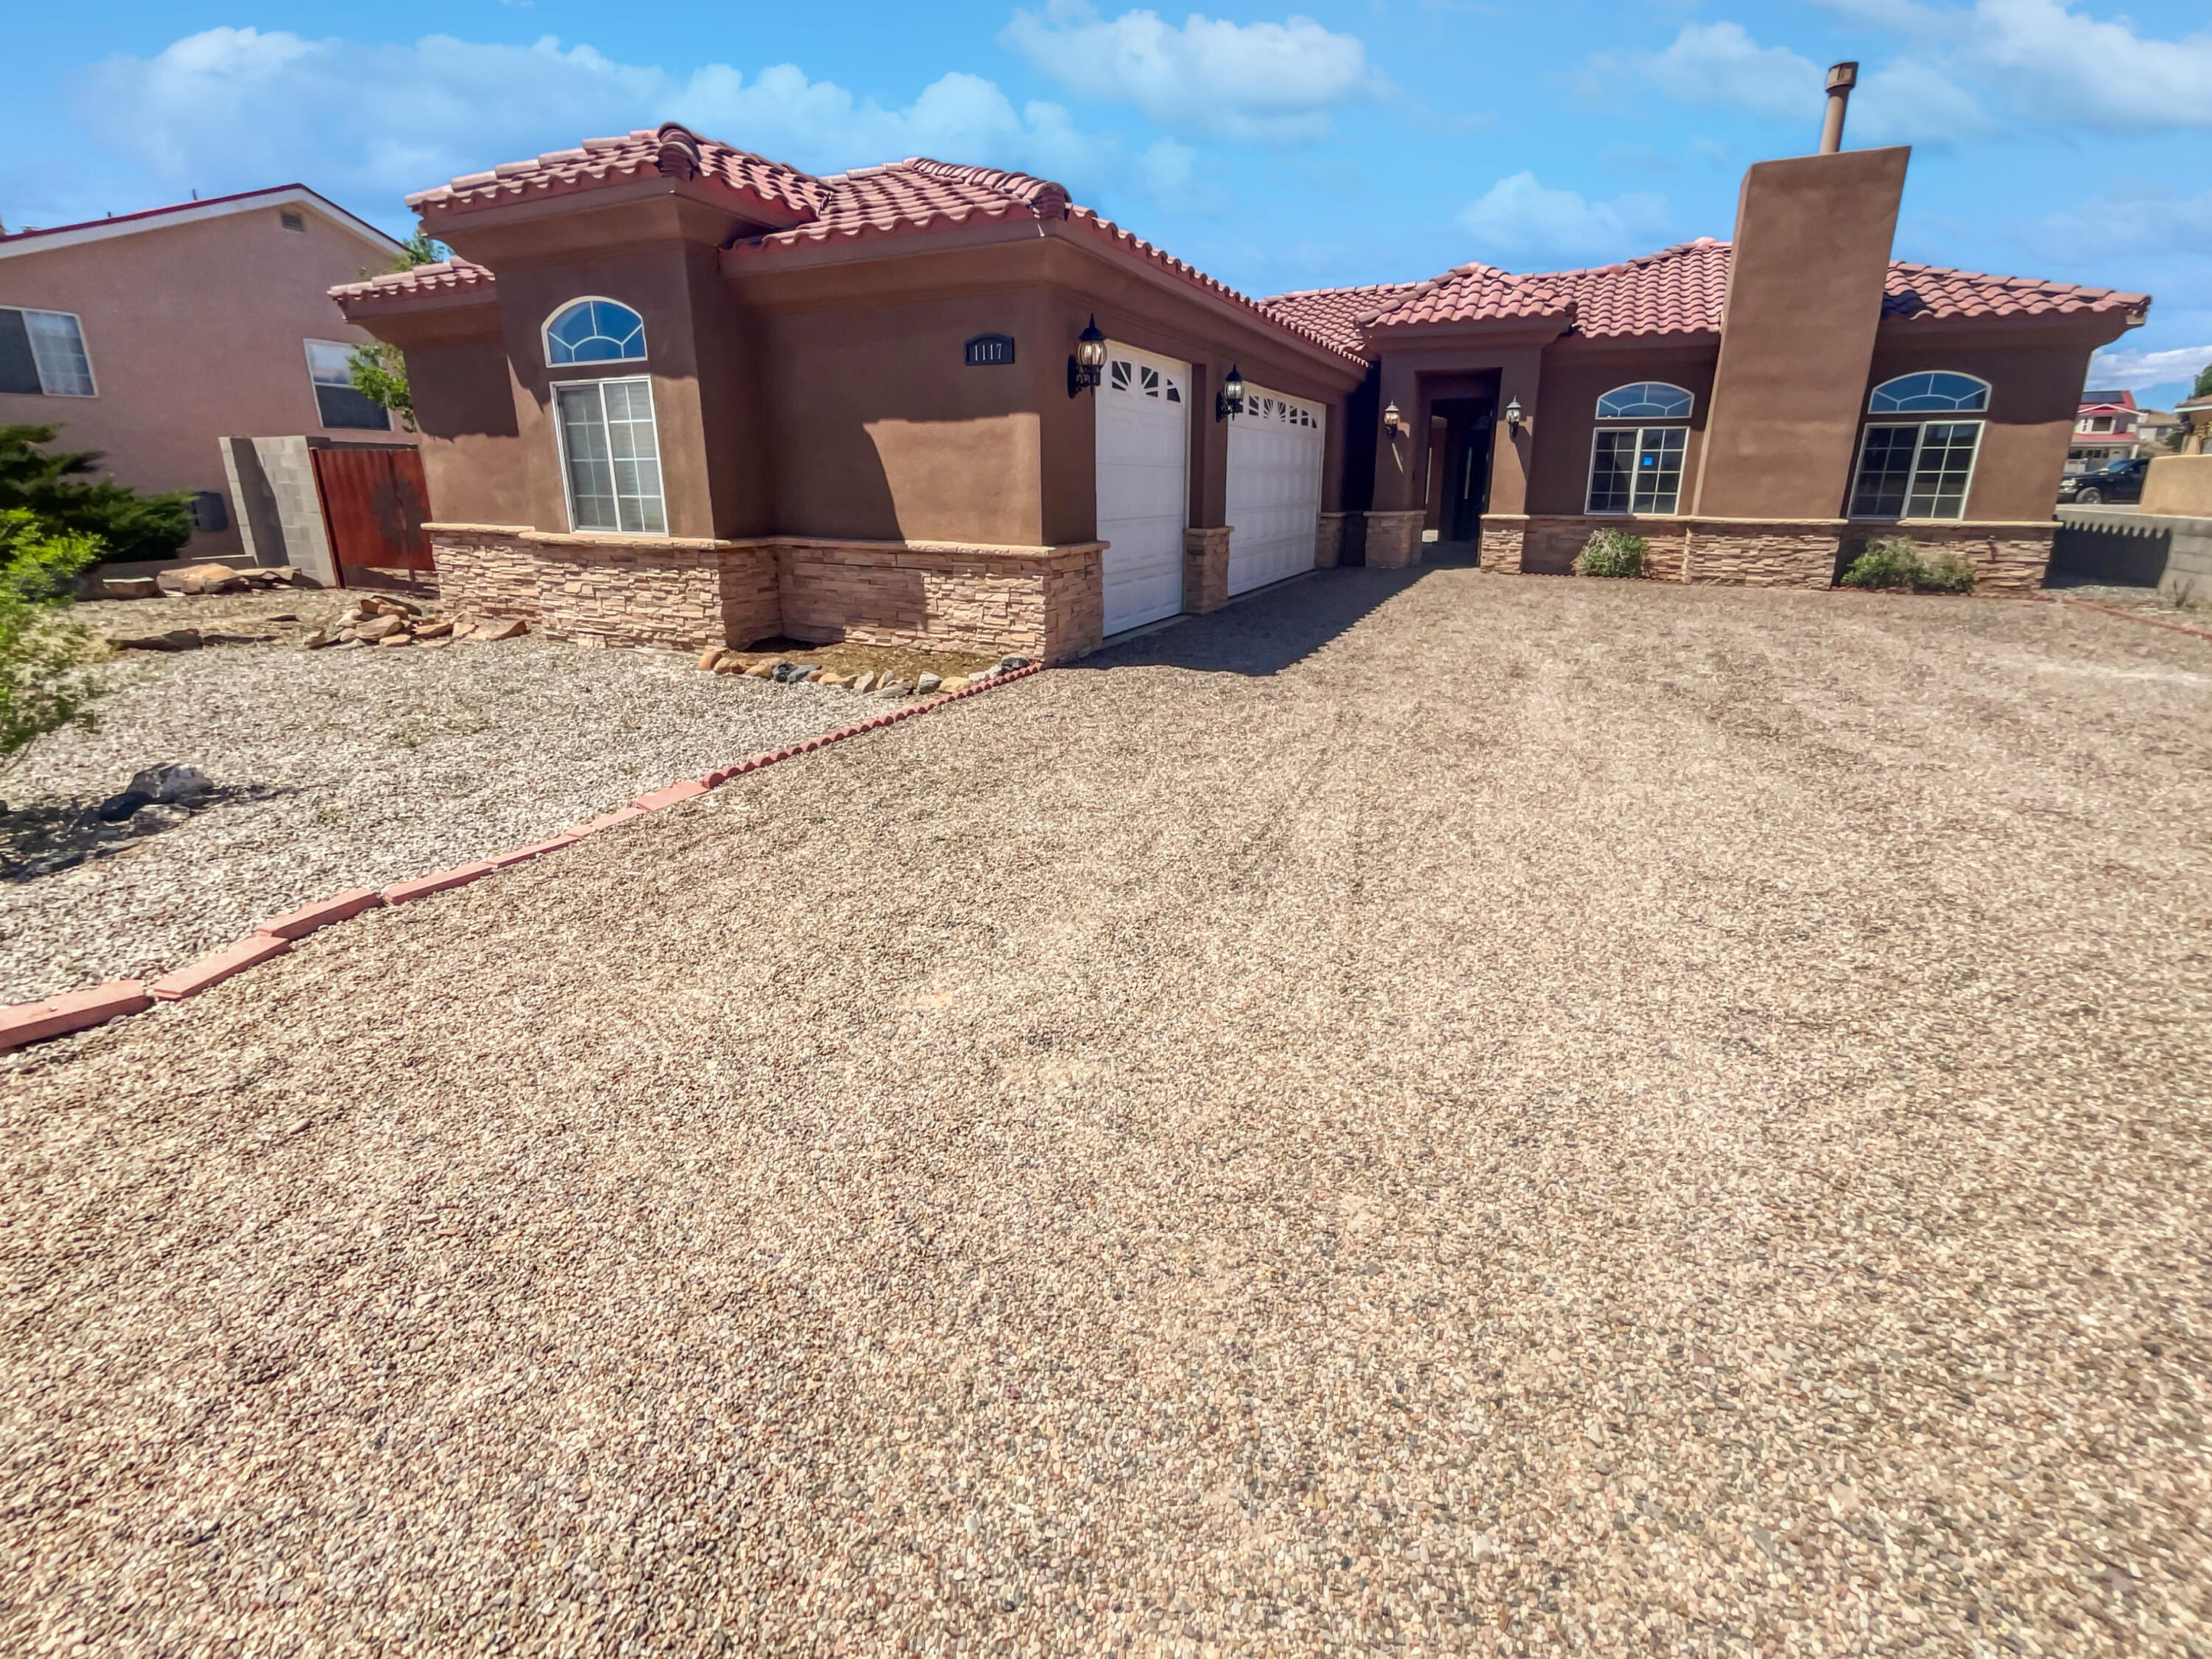 1117 12th Street SE, Rio Rancho, New Mexico 87124, 3 Bedrooms Bedrooms, ,2 BathroomsBathrooms,Residential,For Sale,1117 12th Street SE,1061279